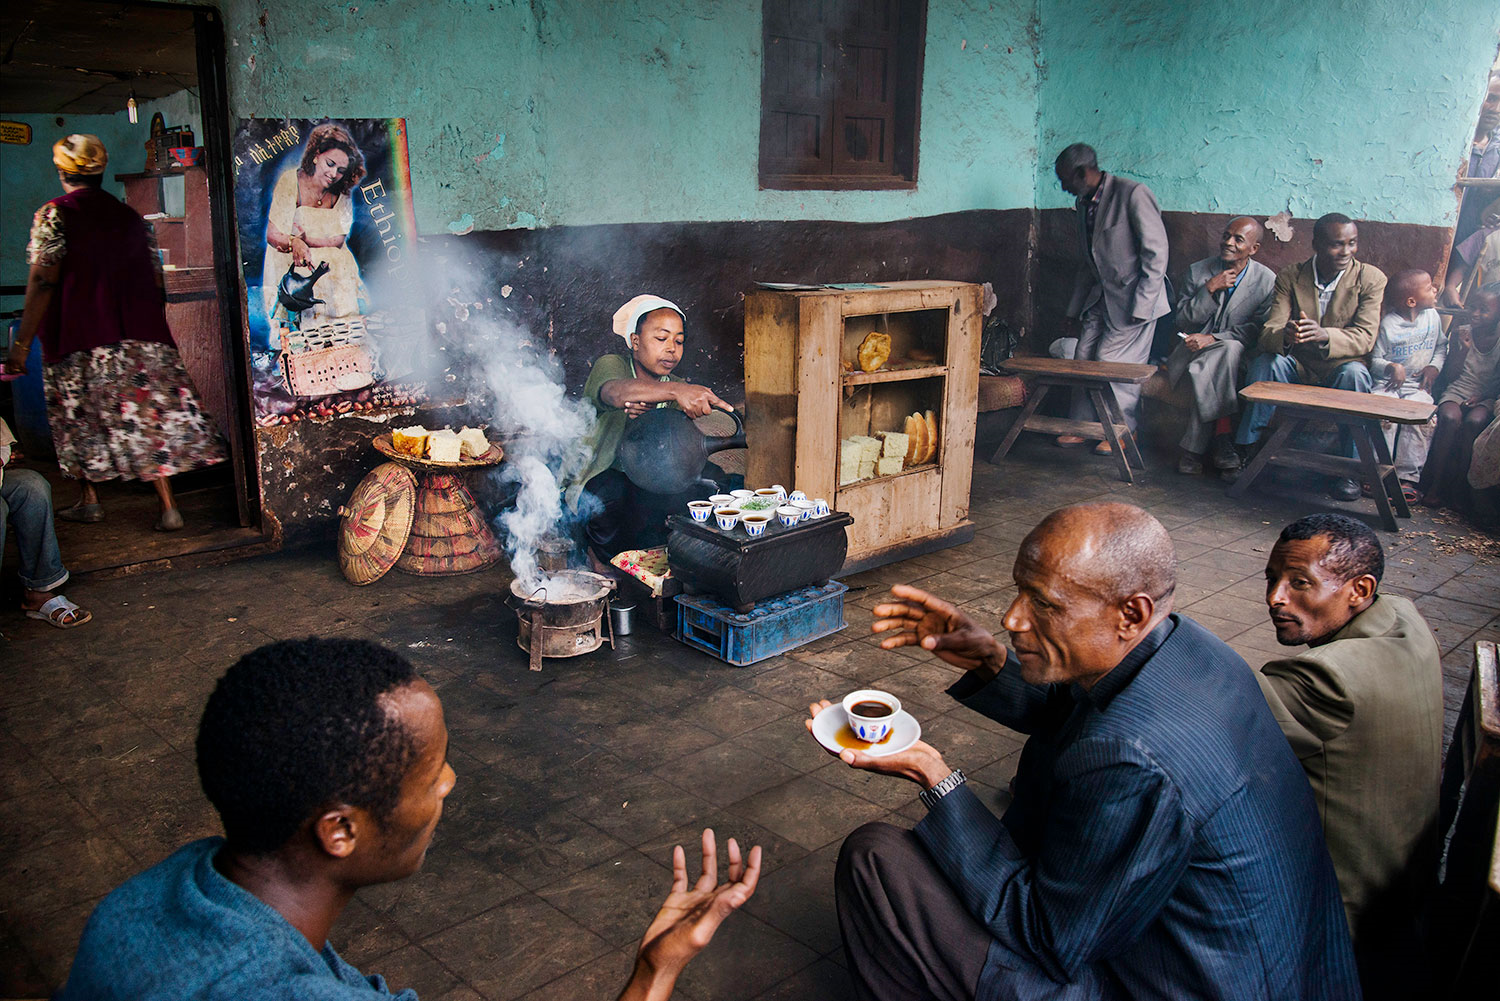 A woman prepares for a coffee ritual, Amaro region, Ethiopia, 2014. All photographs by Steve McCurry